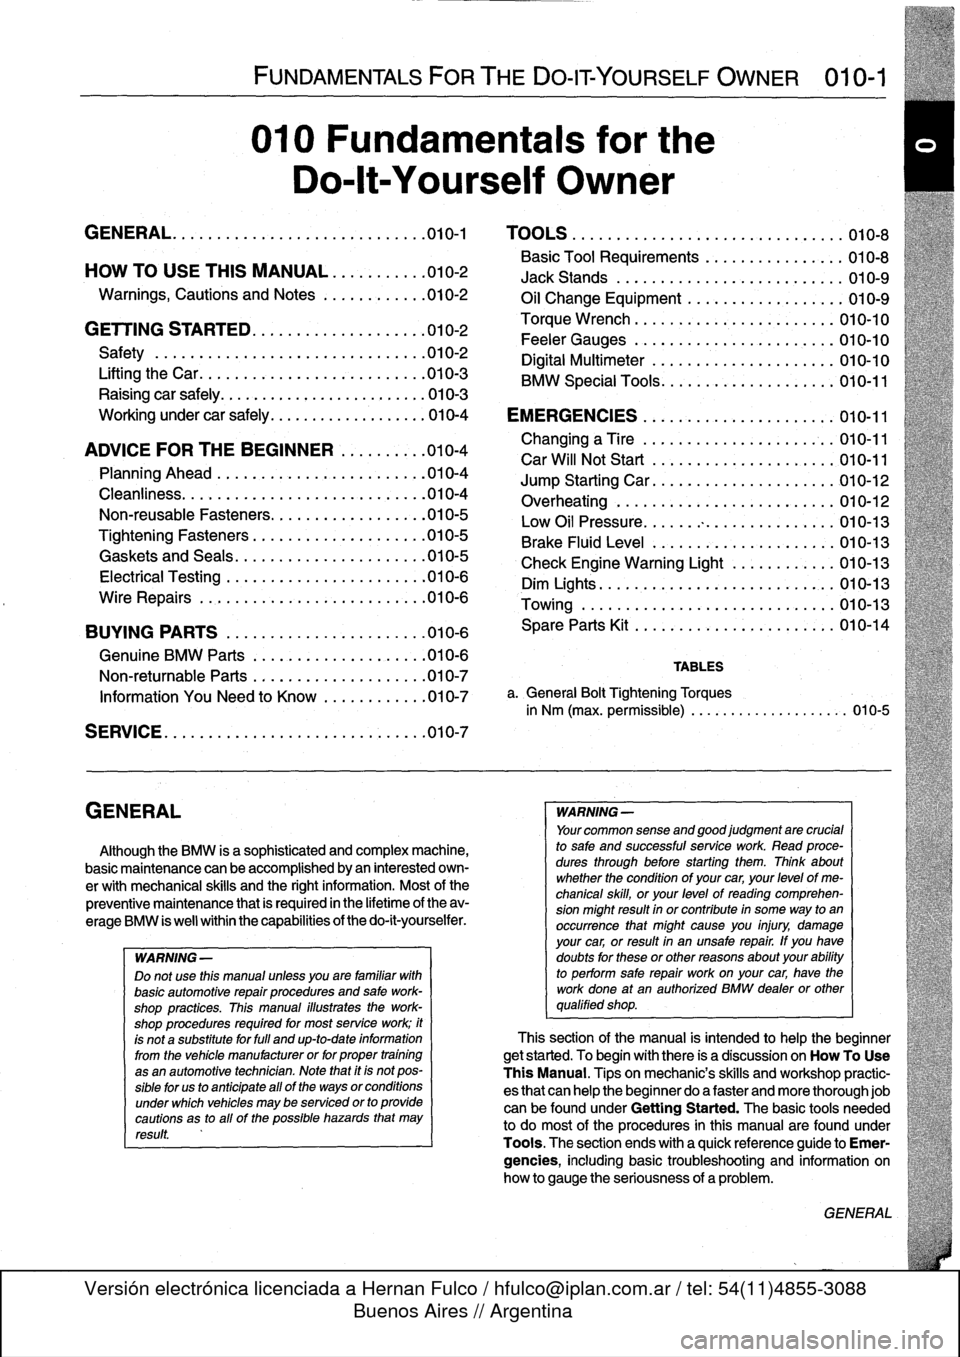 BMW M3 1998 E36 Workshop Manual 
GENERAL

FUNDAMENTALS
FORTHE
DO-IT
YOURSELF
OWNER

	

010-1

010
Fundamentals
for
the

Do-lt-Yourself
Owner

GENERAL
.......
.
.
.
......
.
.........
.
.
.010-1

	

TOOLS
.
.
...
.
............
.
...